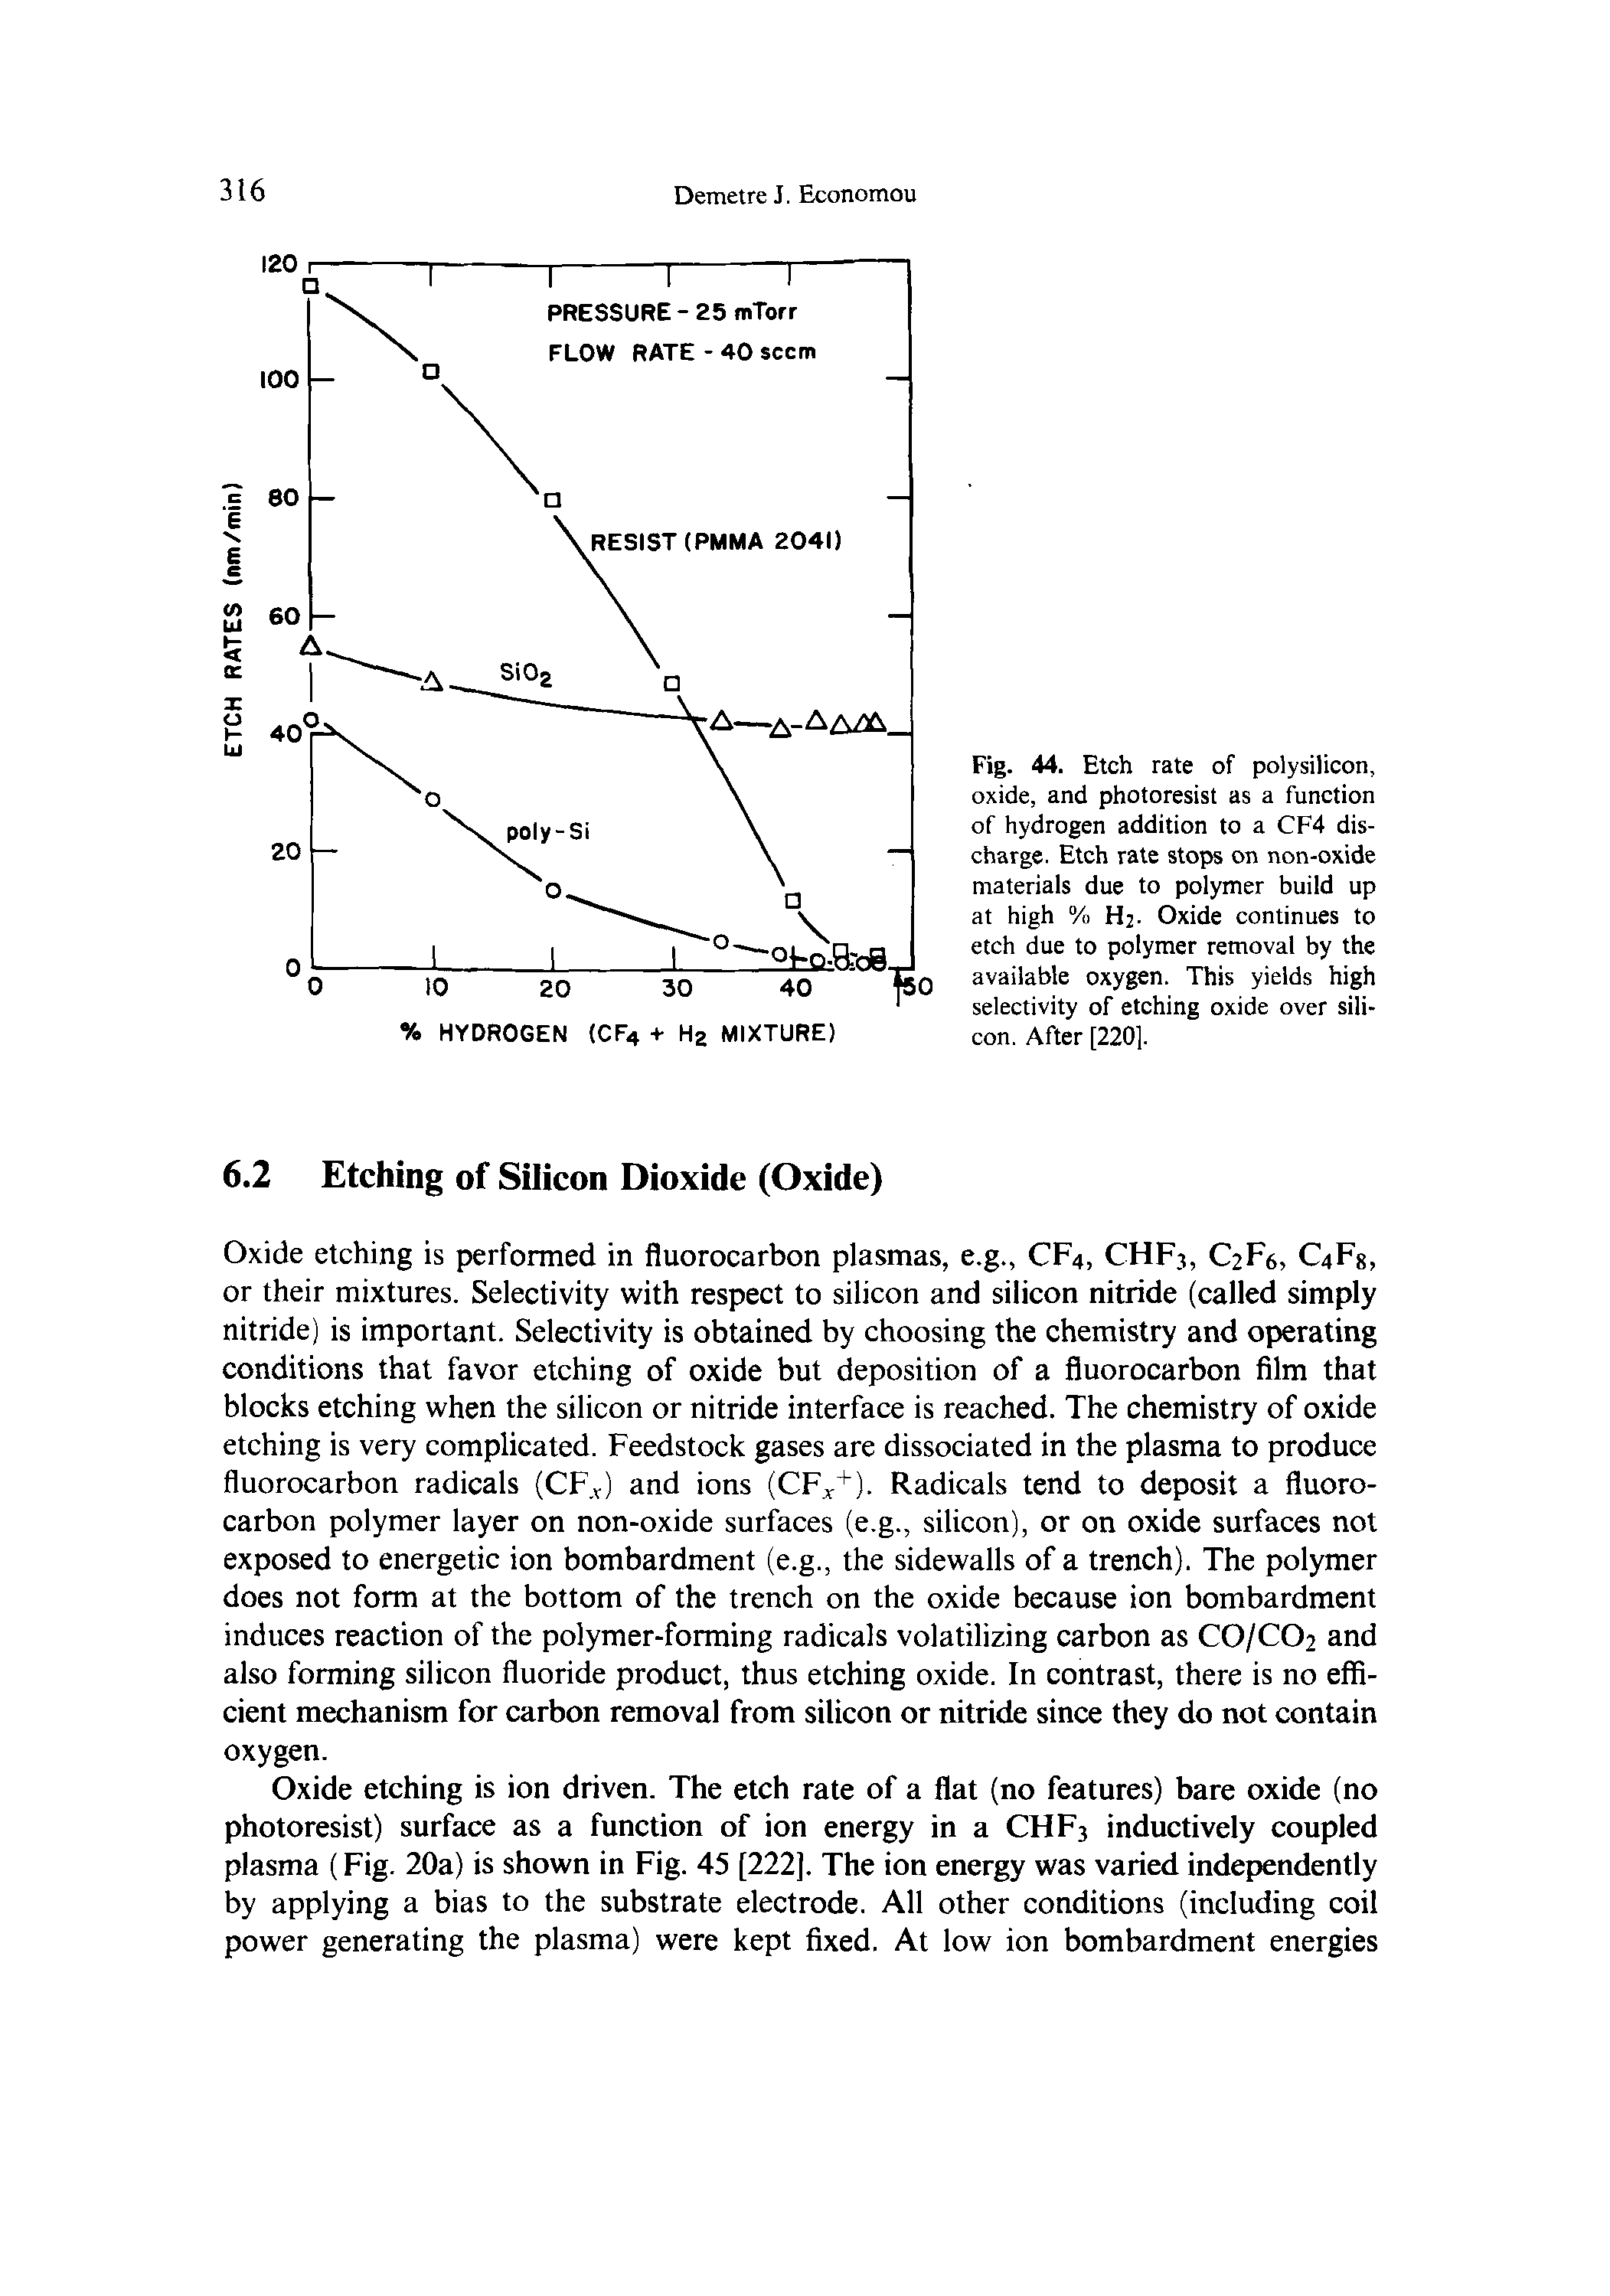 Fig. 44. Etch rate of polysilicon, oxide, and photoresist as a function of hydrogen addition to a CF4 discharge. Etch rate stops on non-oxide materials due to polymer build up at high % H - Oxide continues to etch due to polymer removal by the available oxygen. This yields high selectivity of etching oxide over silicon. After [220].